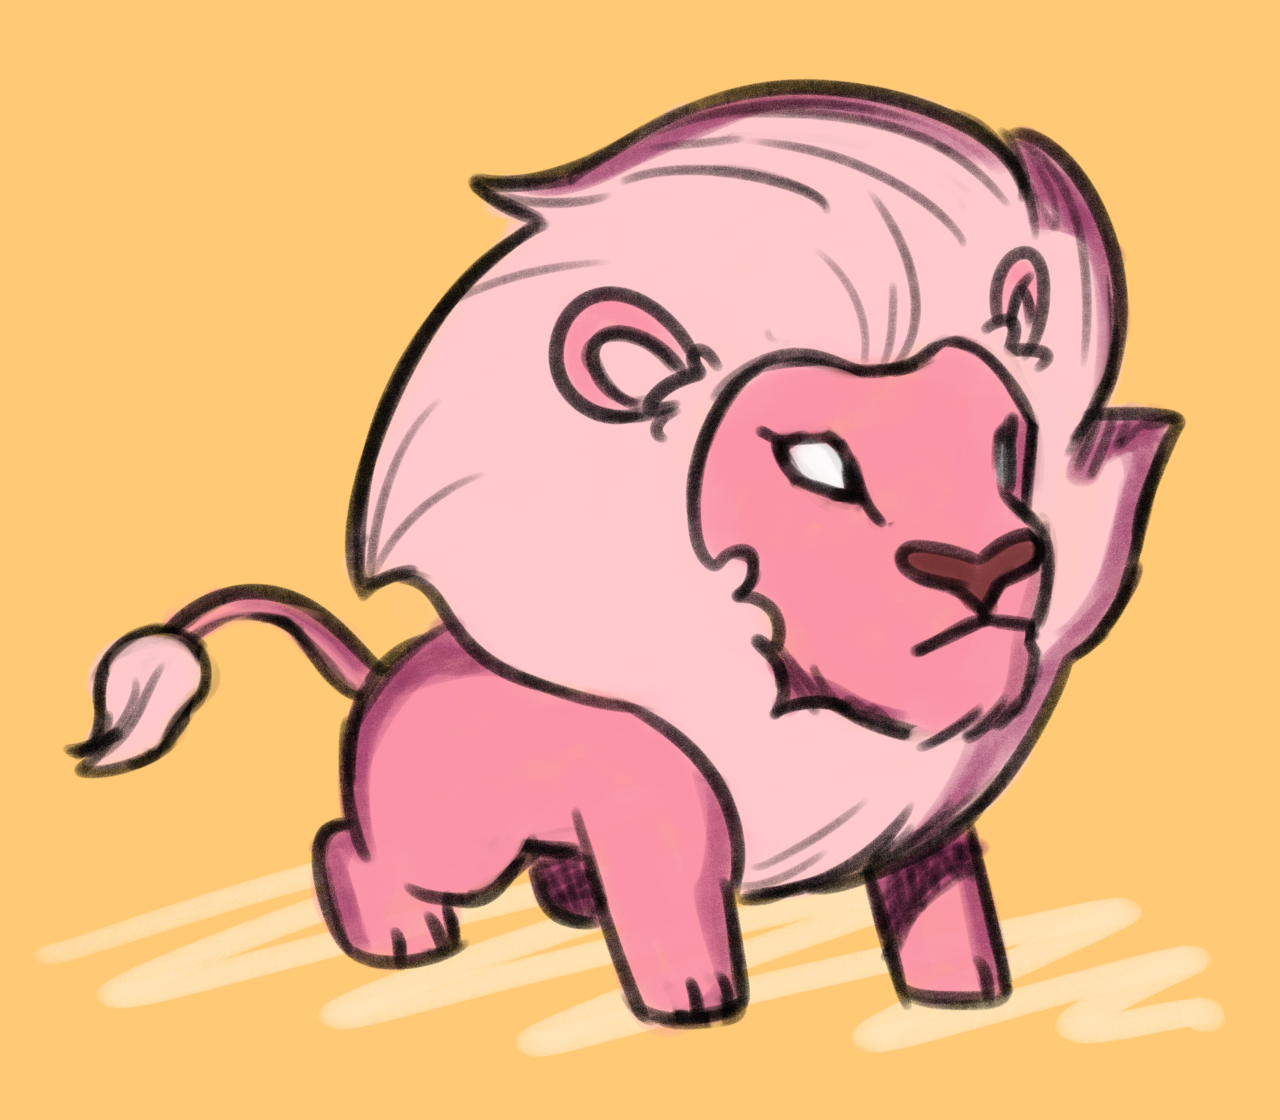 everyone’s fav lion from steven universe!